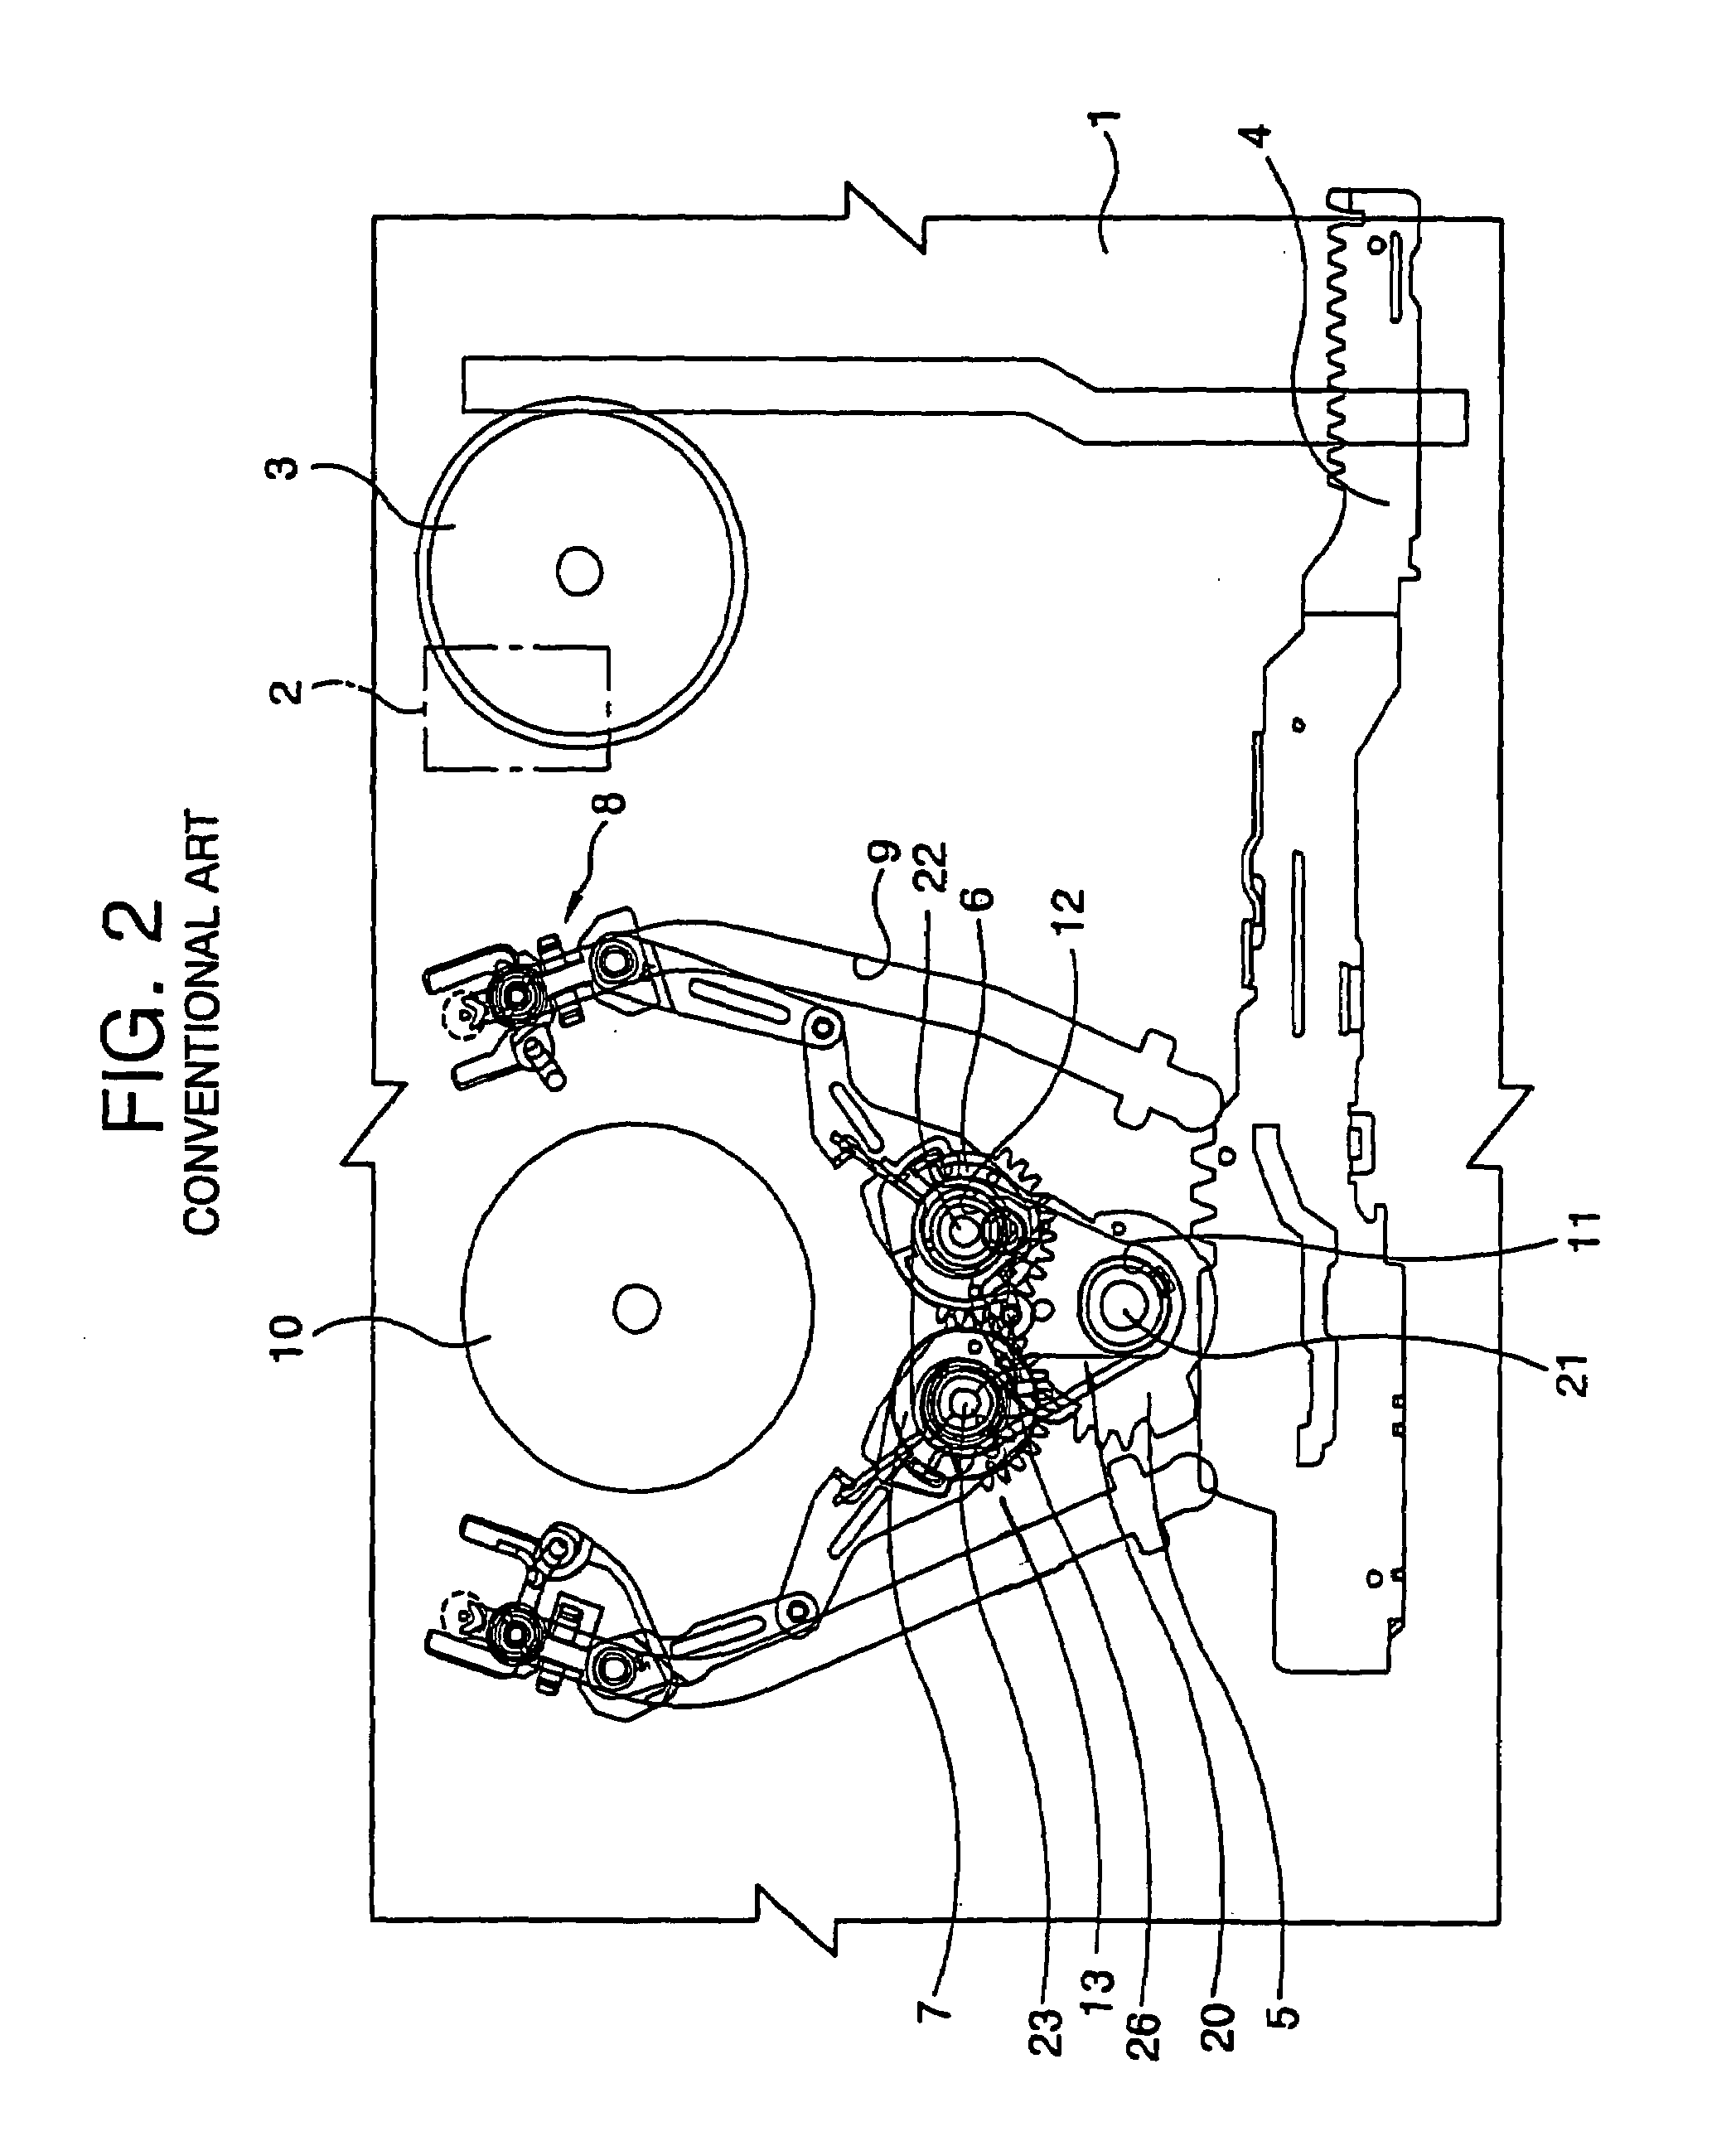 Loading gear supporting apparatus of video cassette recorder